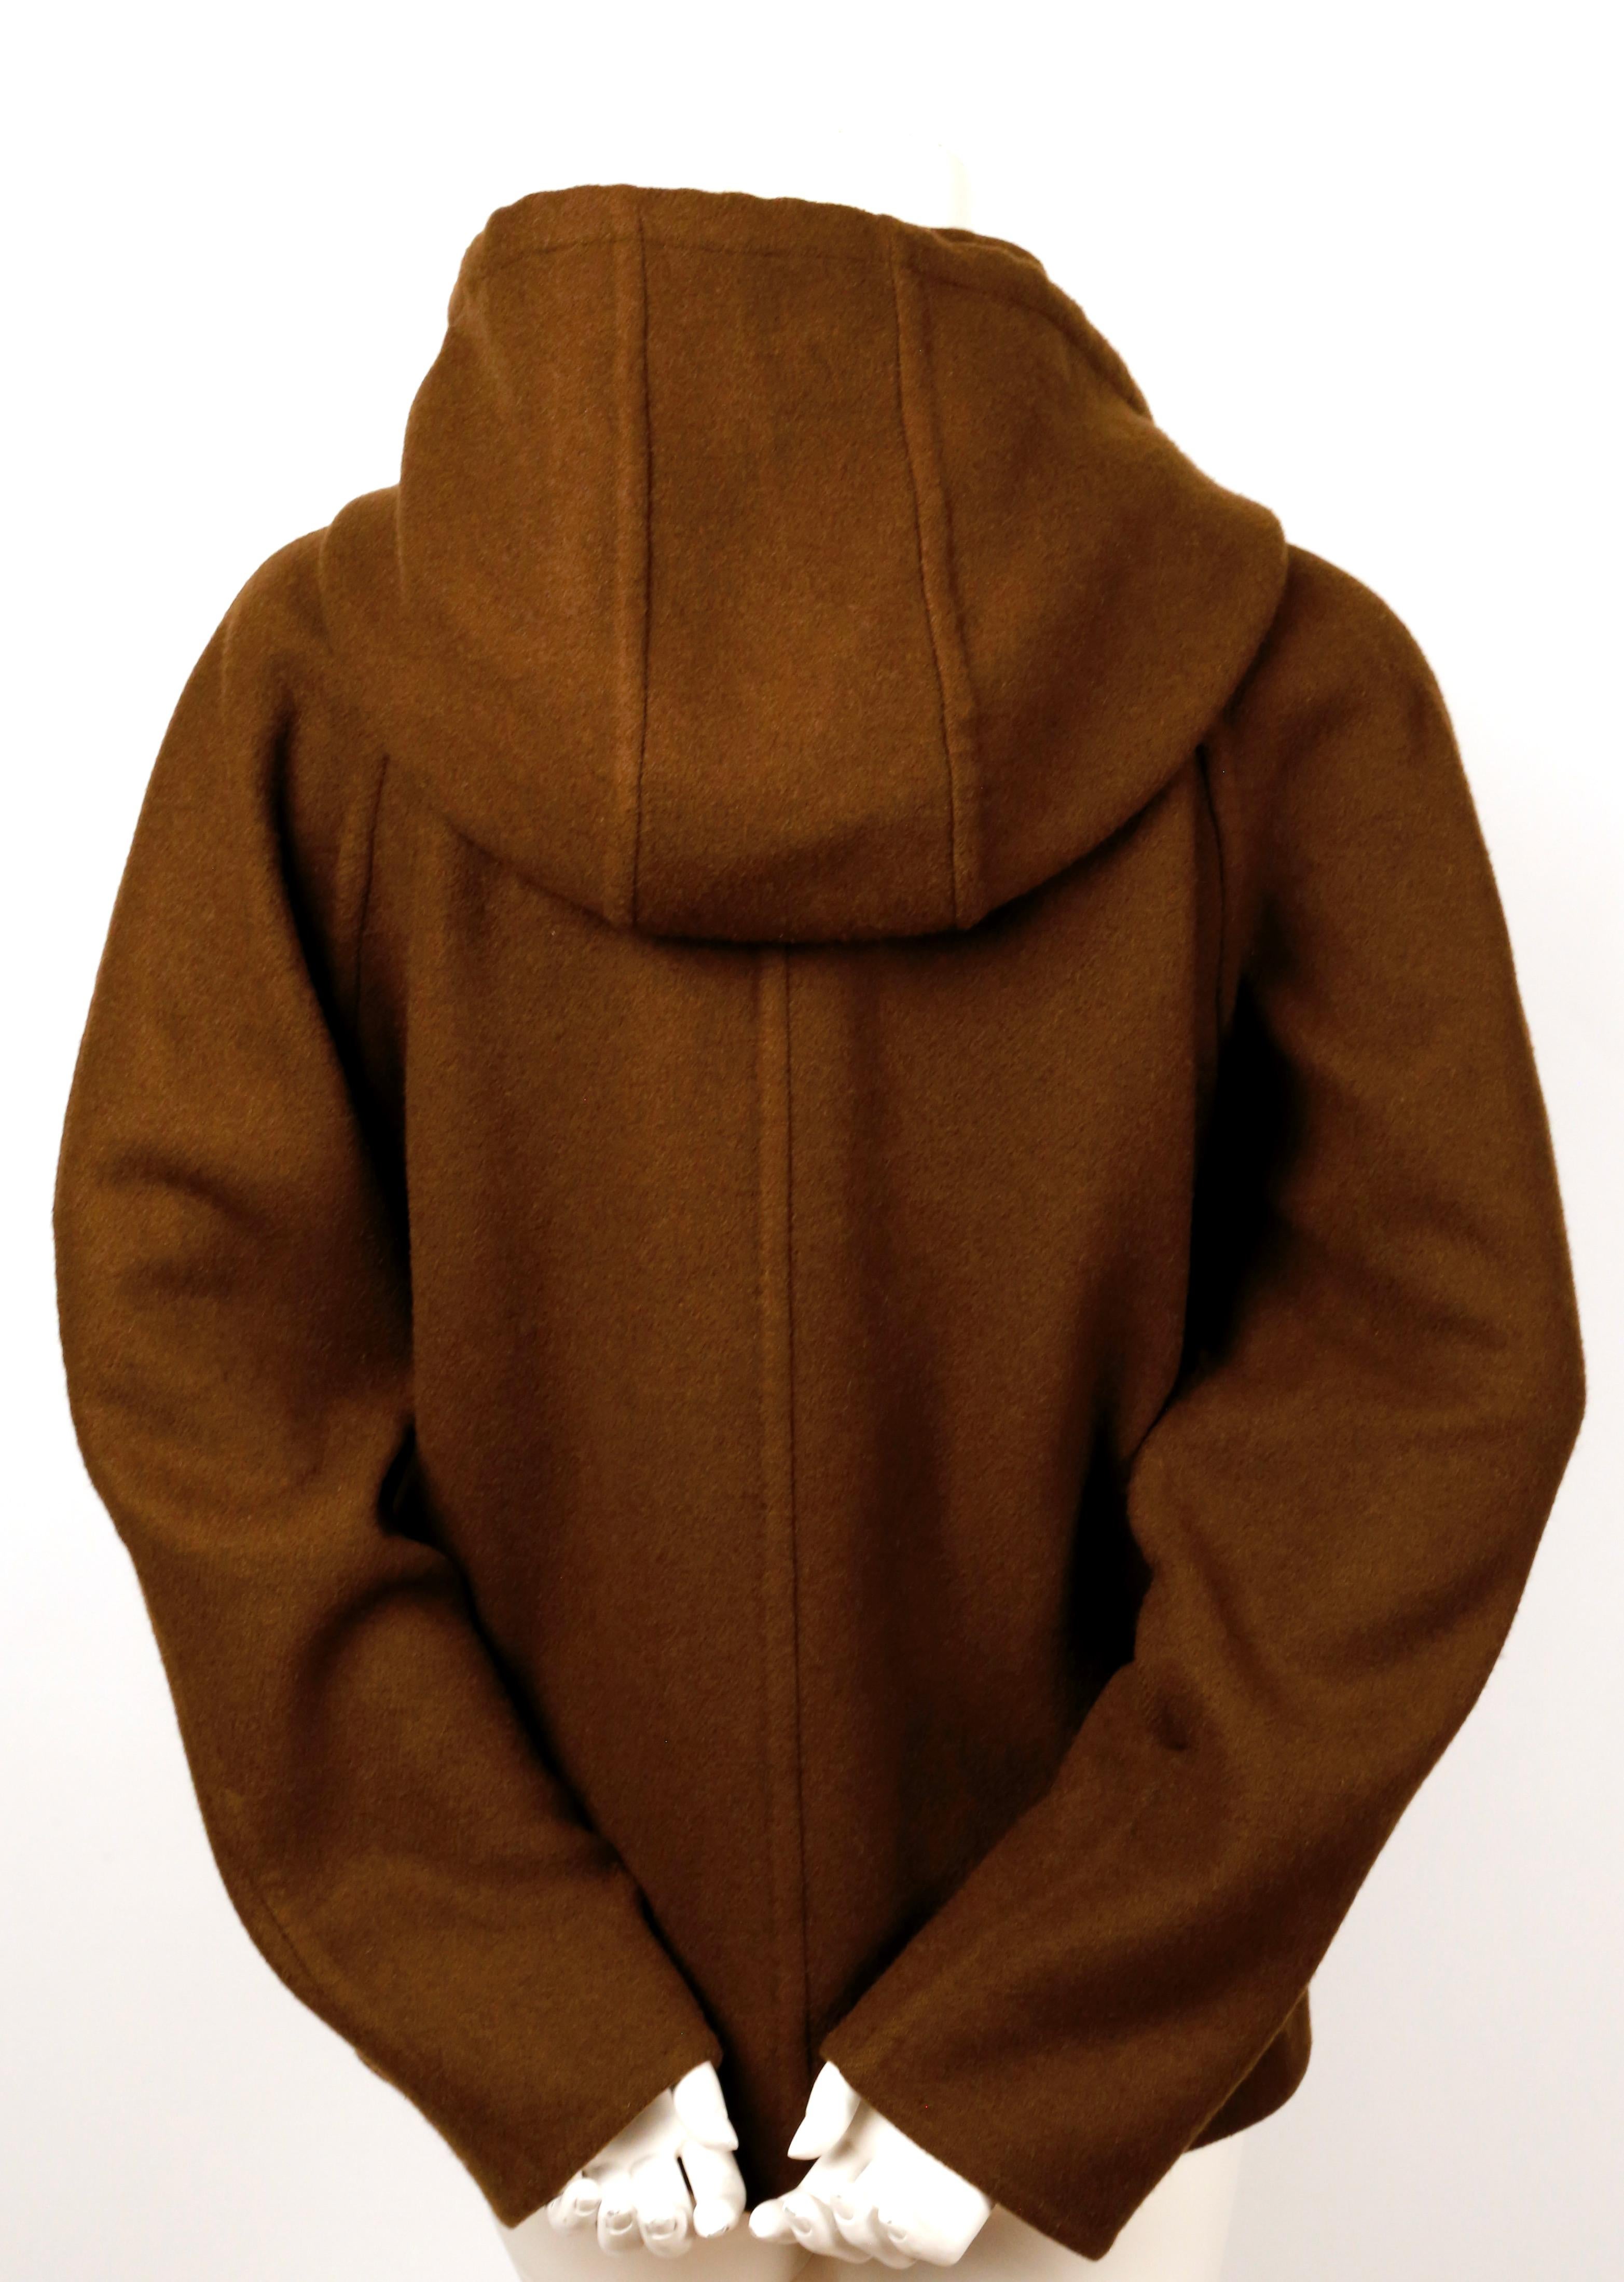 2014 CELINE by PHOEBE PHILO hooded cashmere jacket with patch pockets In Excellent Condition In San Fransisco, CA